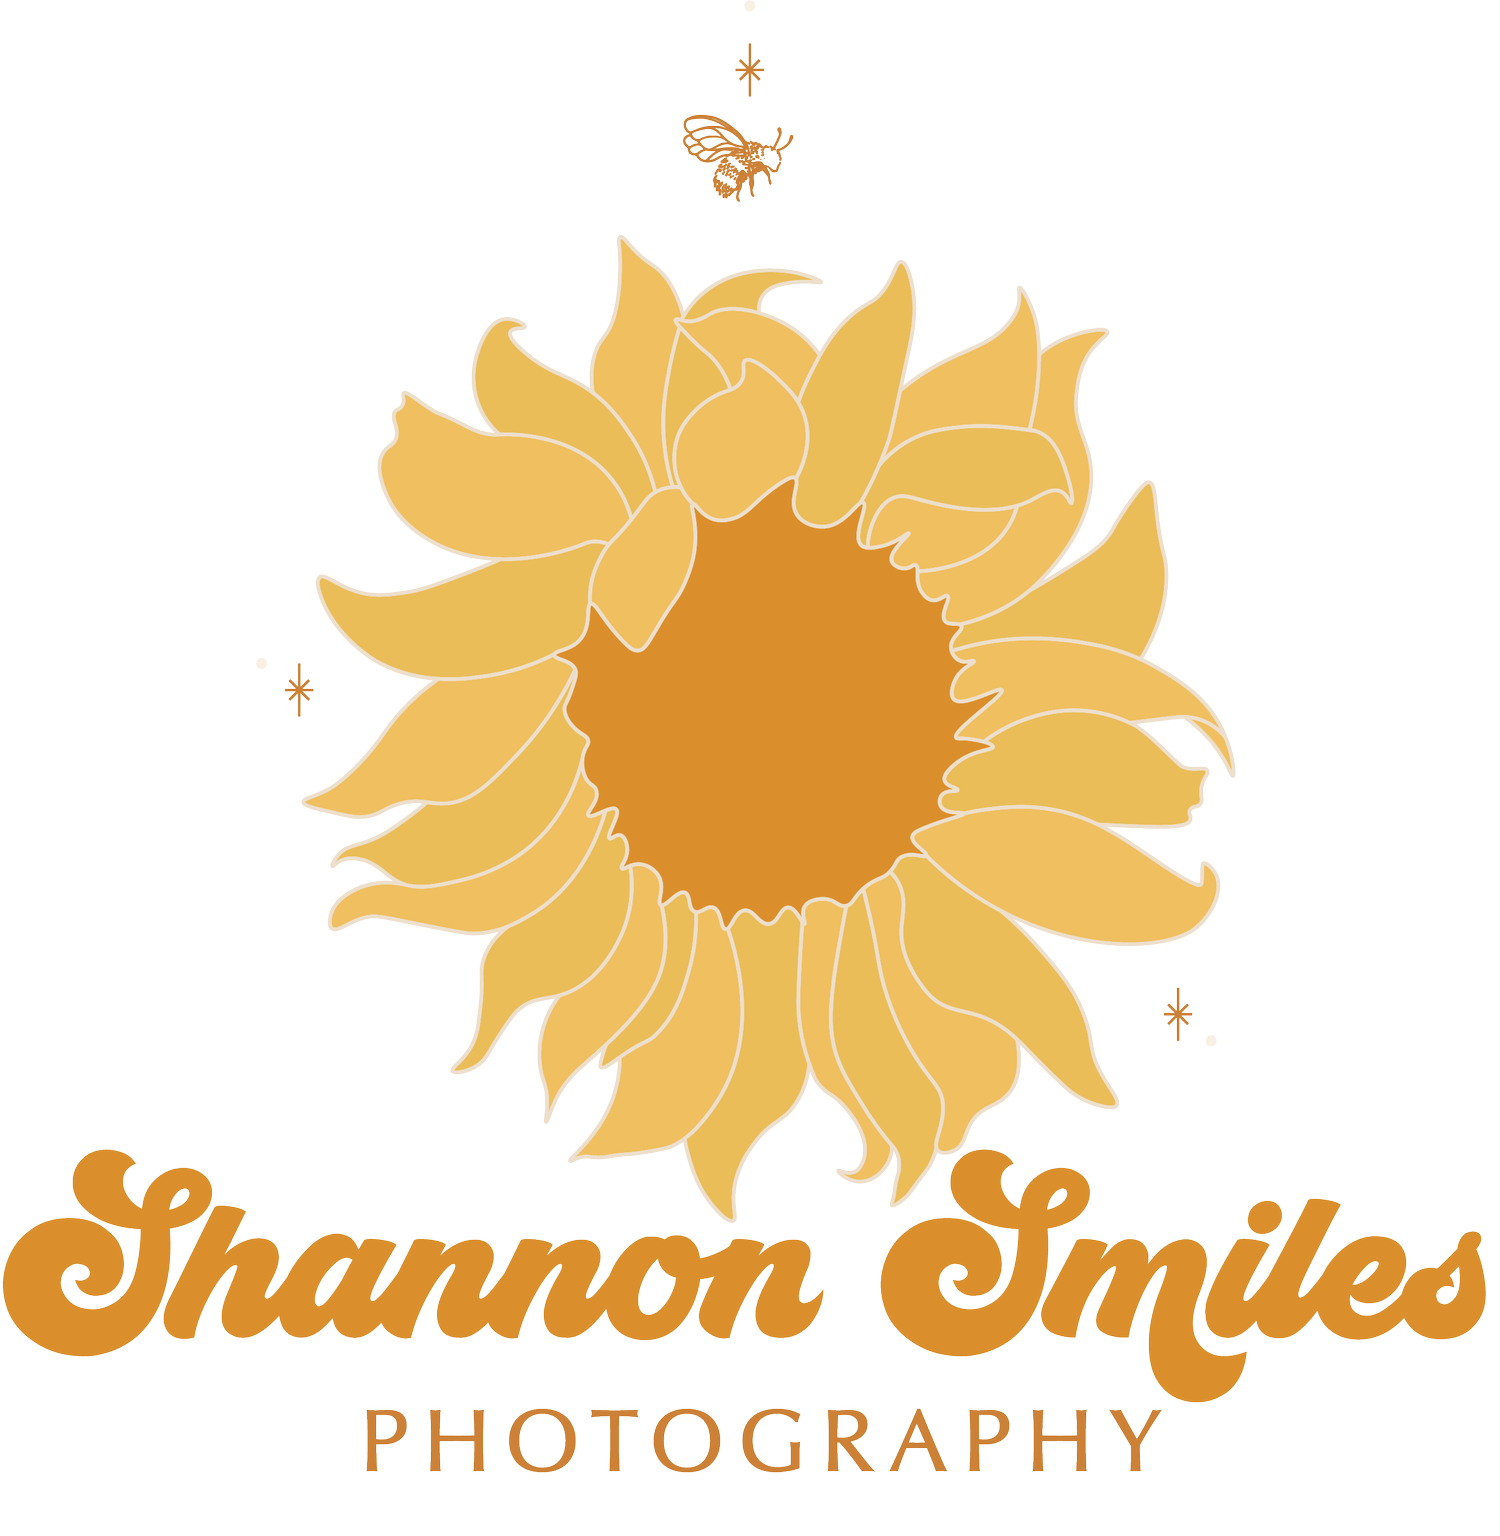 Shannon Smiles Photography